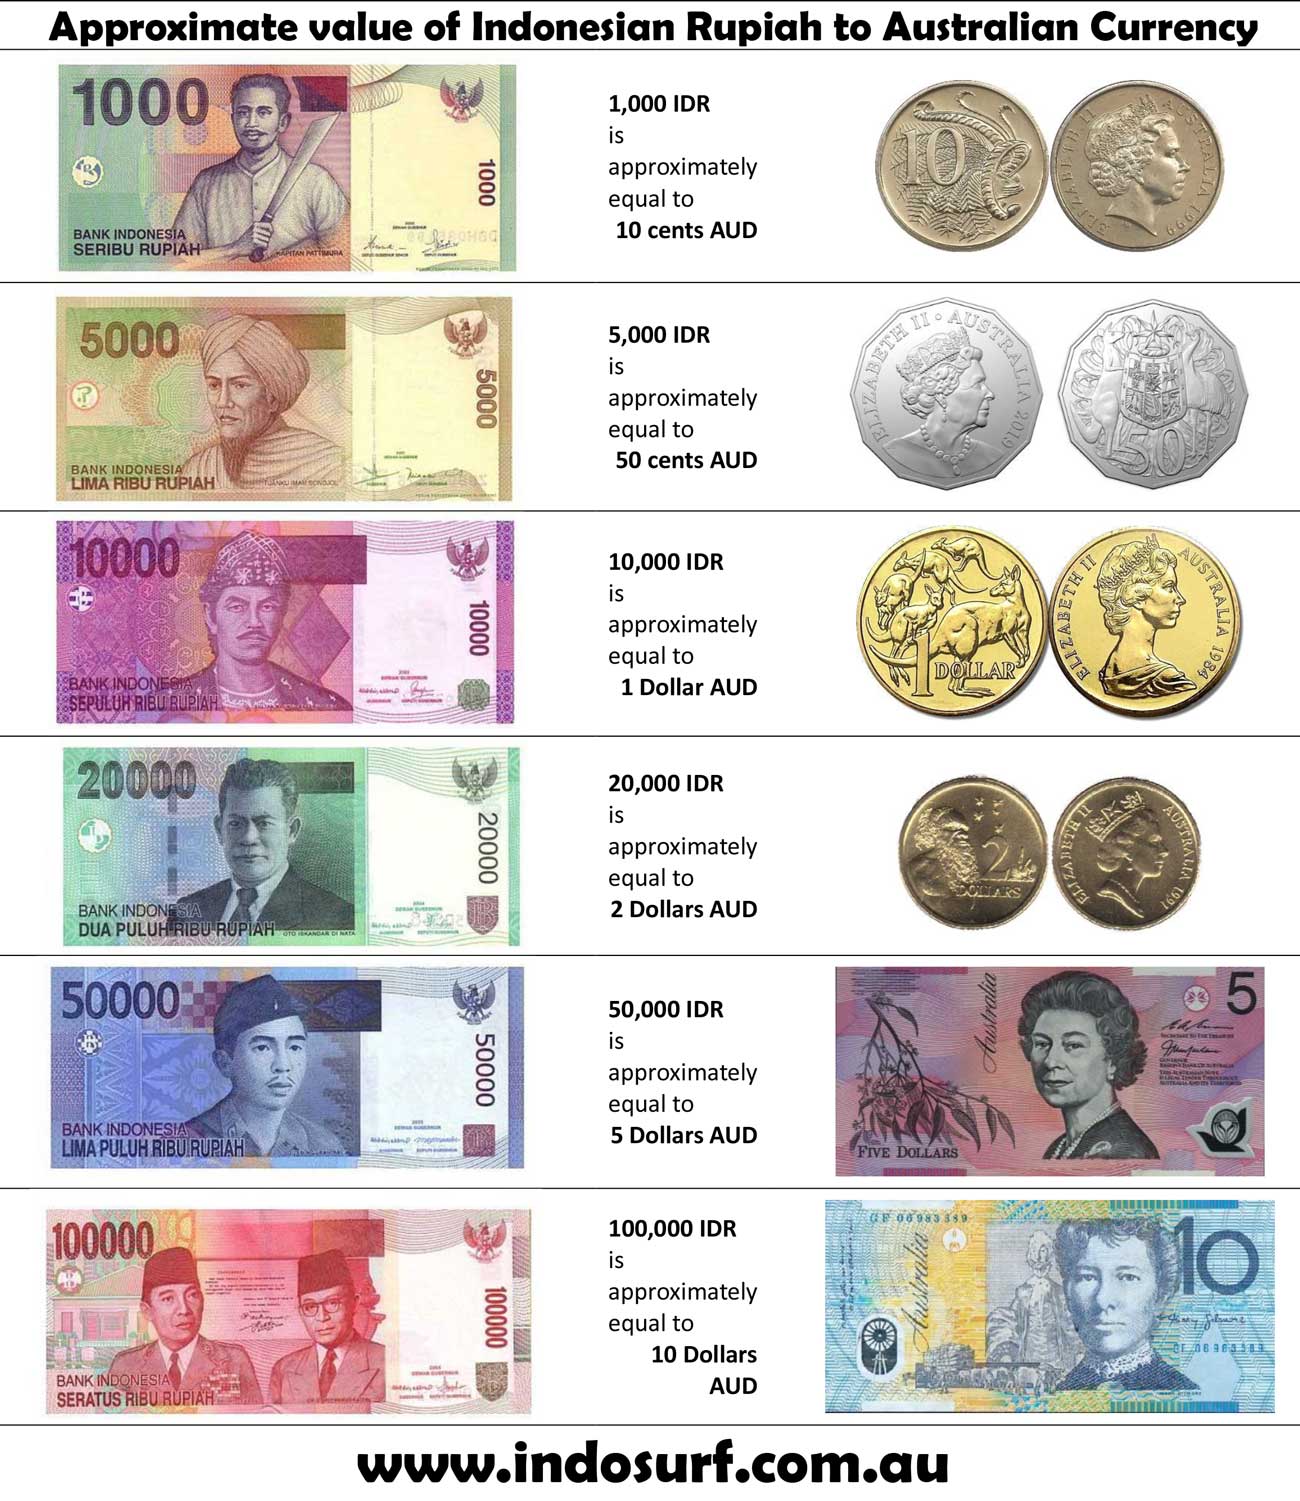 Approximate value of Indonesian Rupiah ( IDR) to Australian currency (AUD)